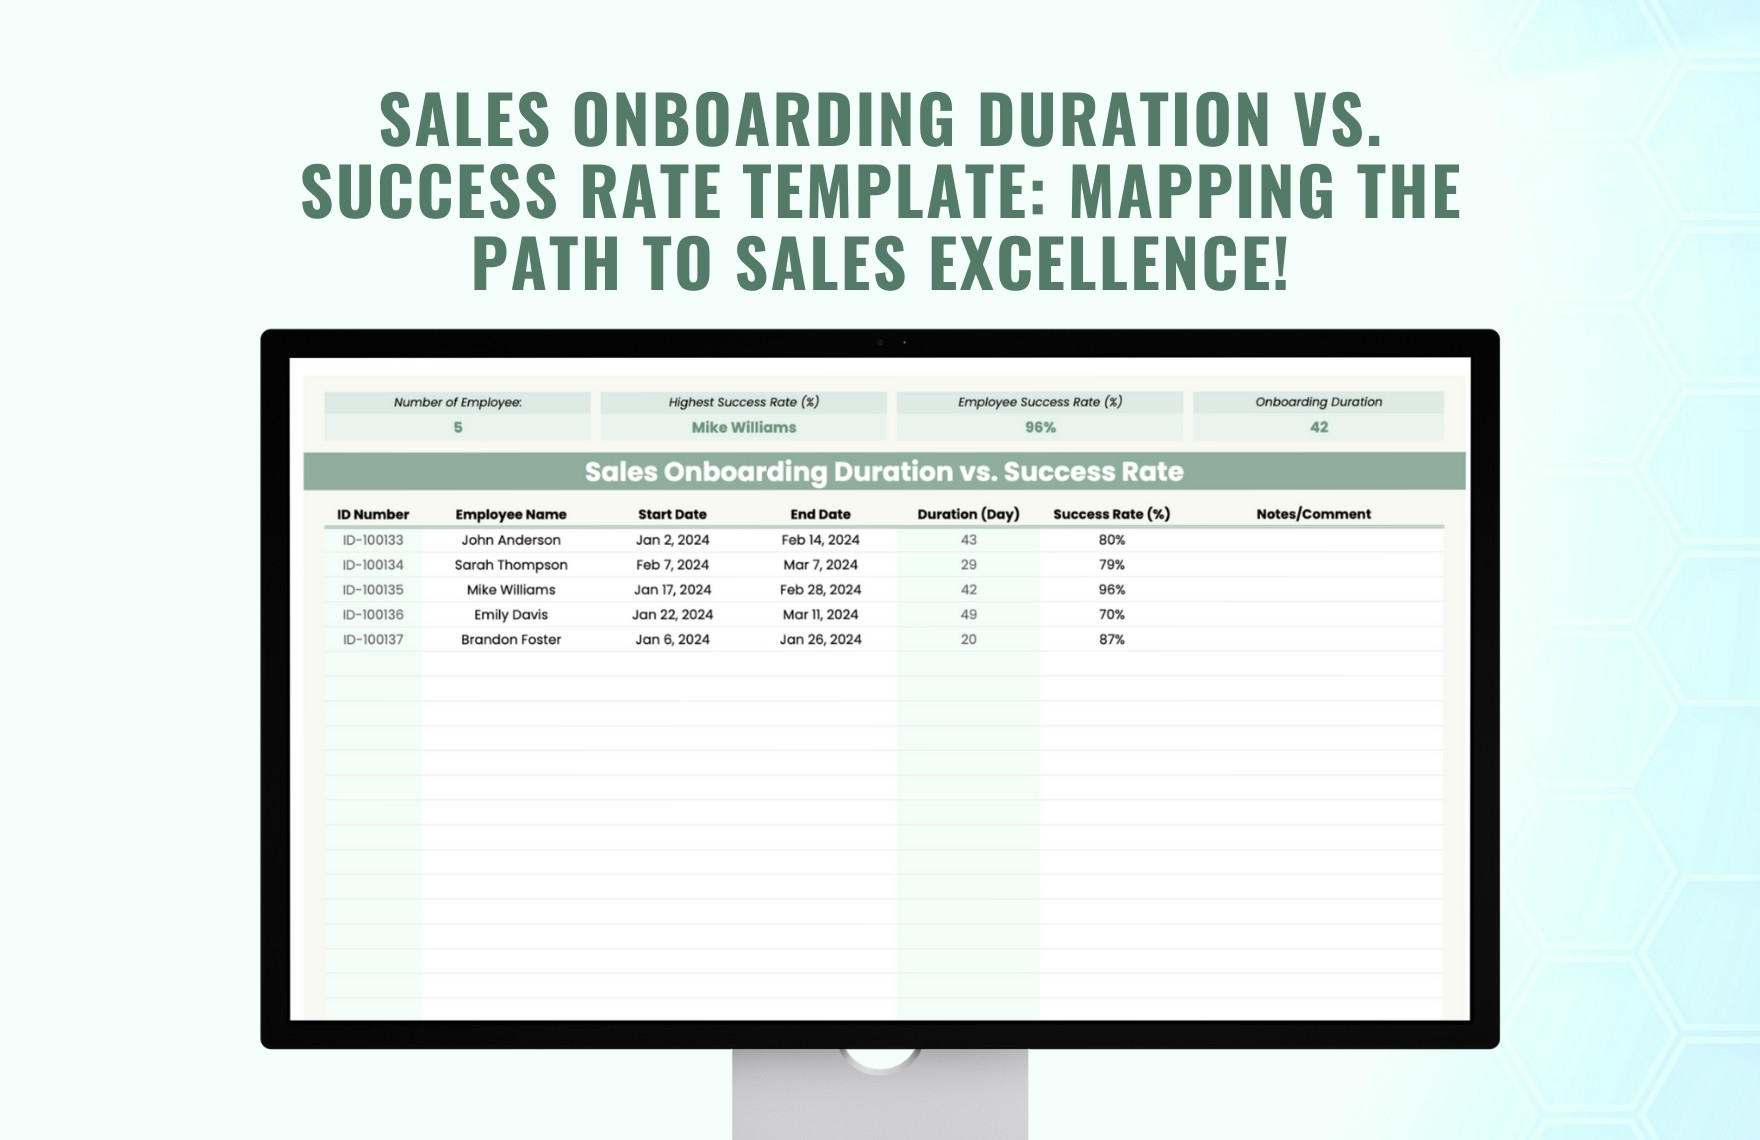 Sales Onboarding Duration vs. Success Rate Template